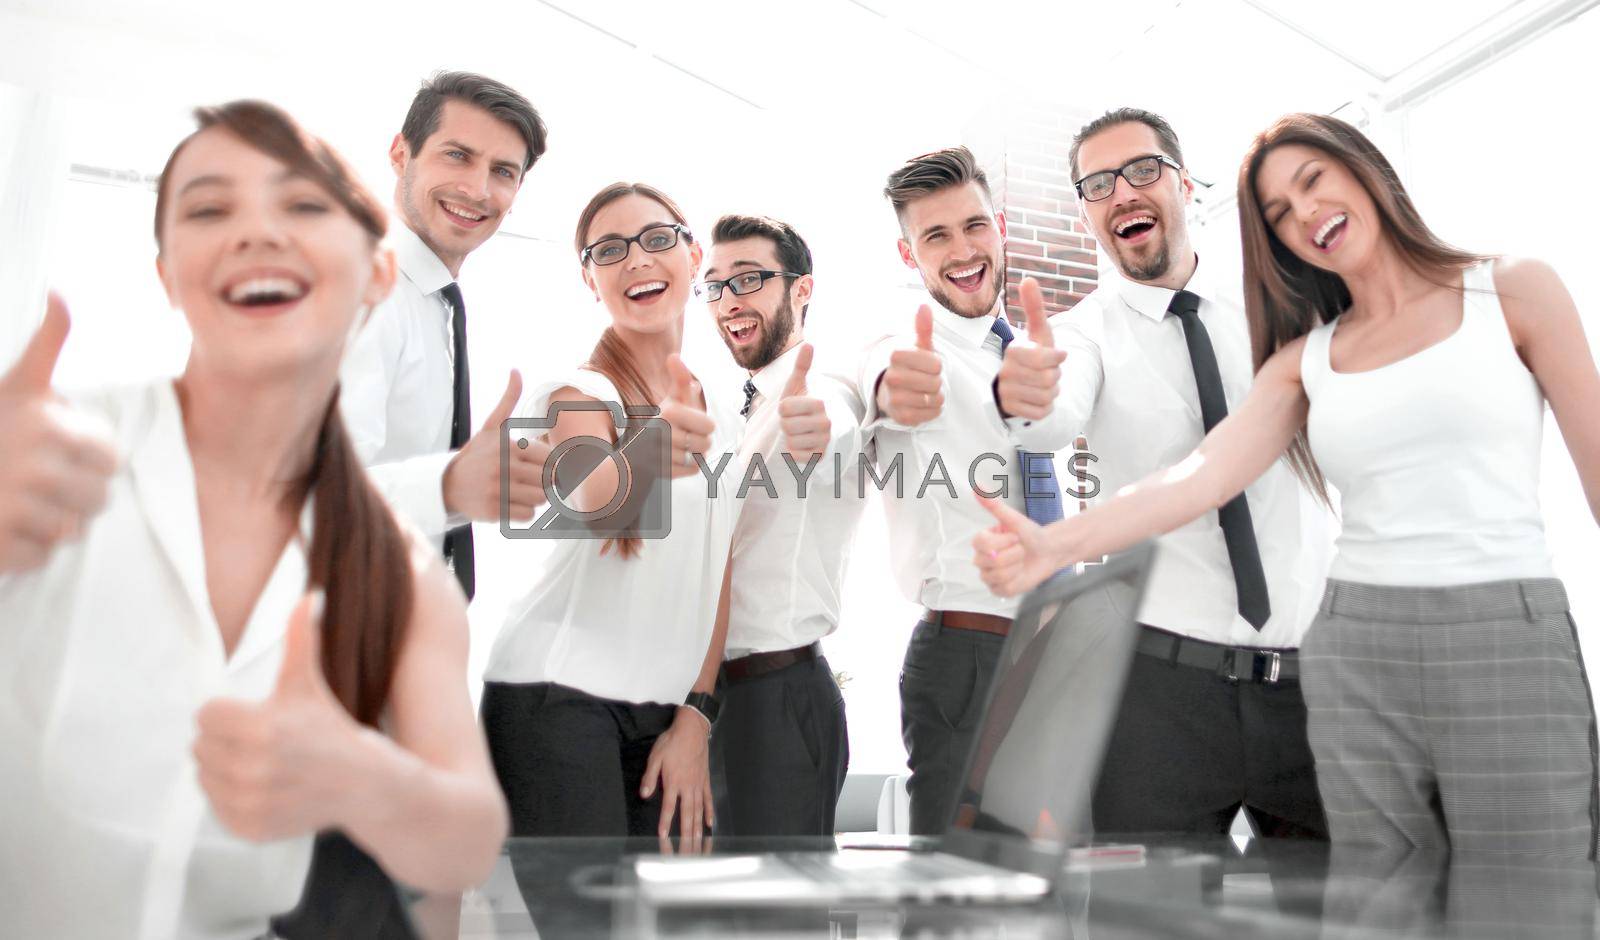 Royalty free image of successful business team showing the thumb up by asdf